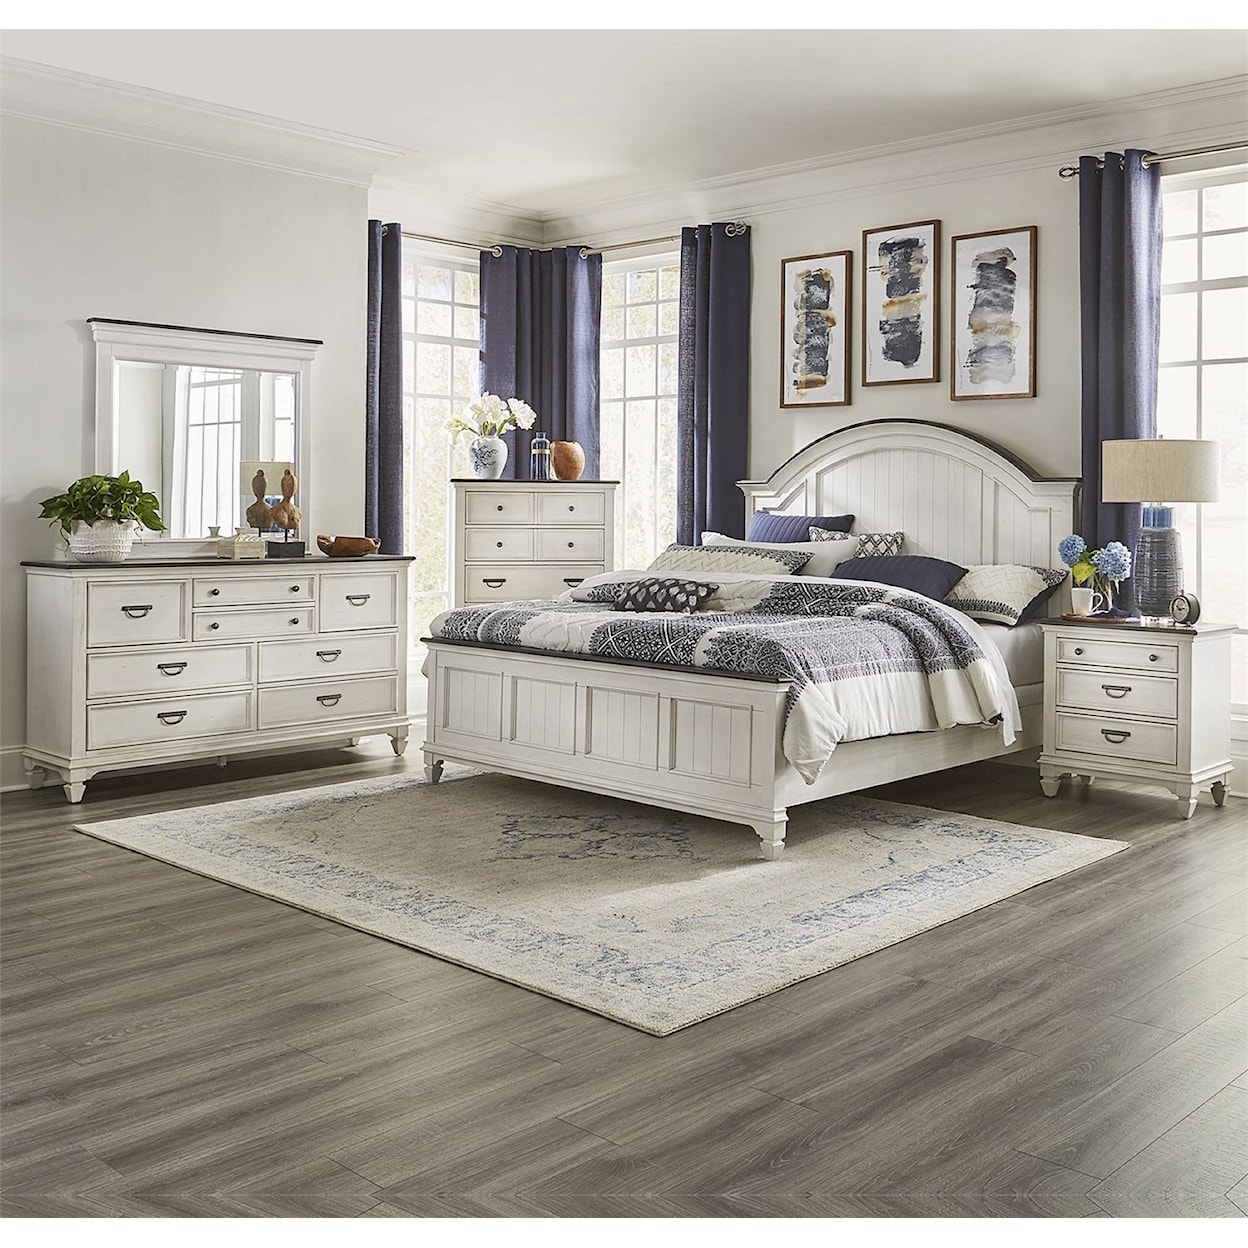 Liberty Furniture Allyson Park King Bedroom Group